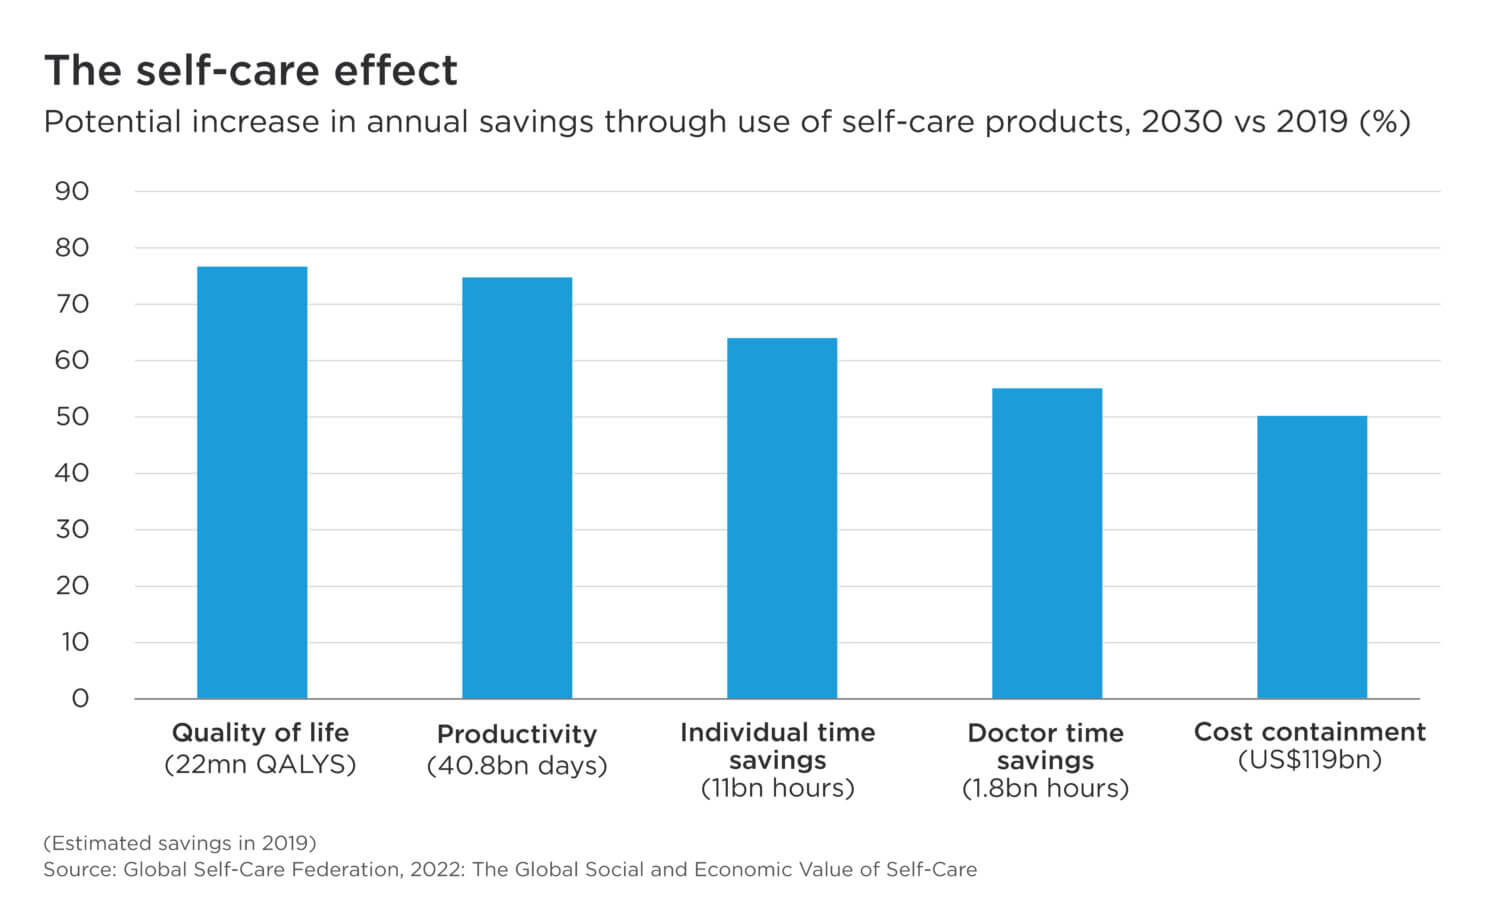 Potential increase in annual savings through use of self-care products, 2030 vs 2019 (%)